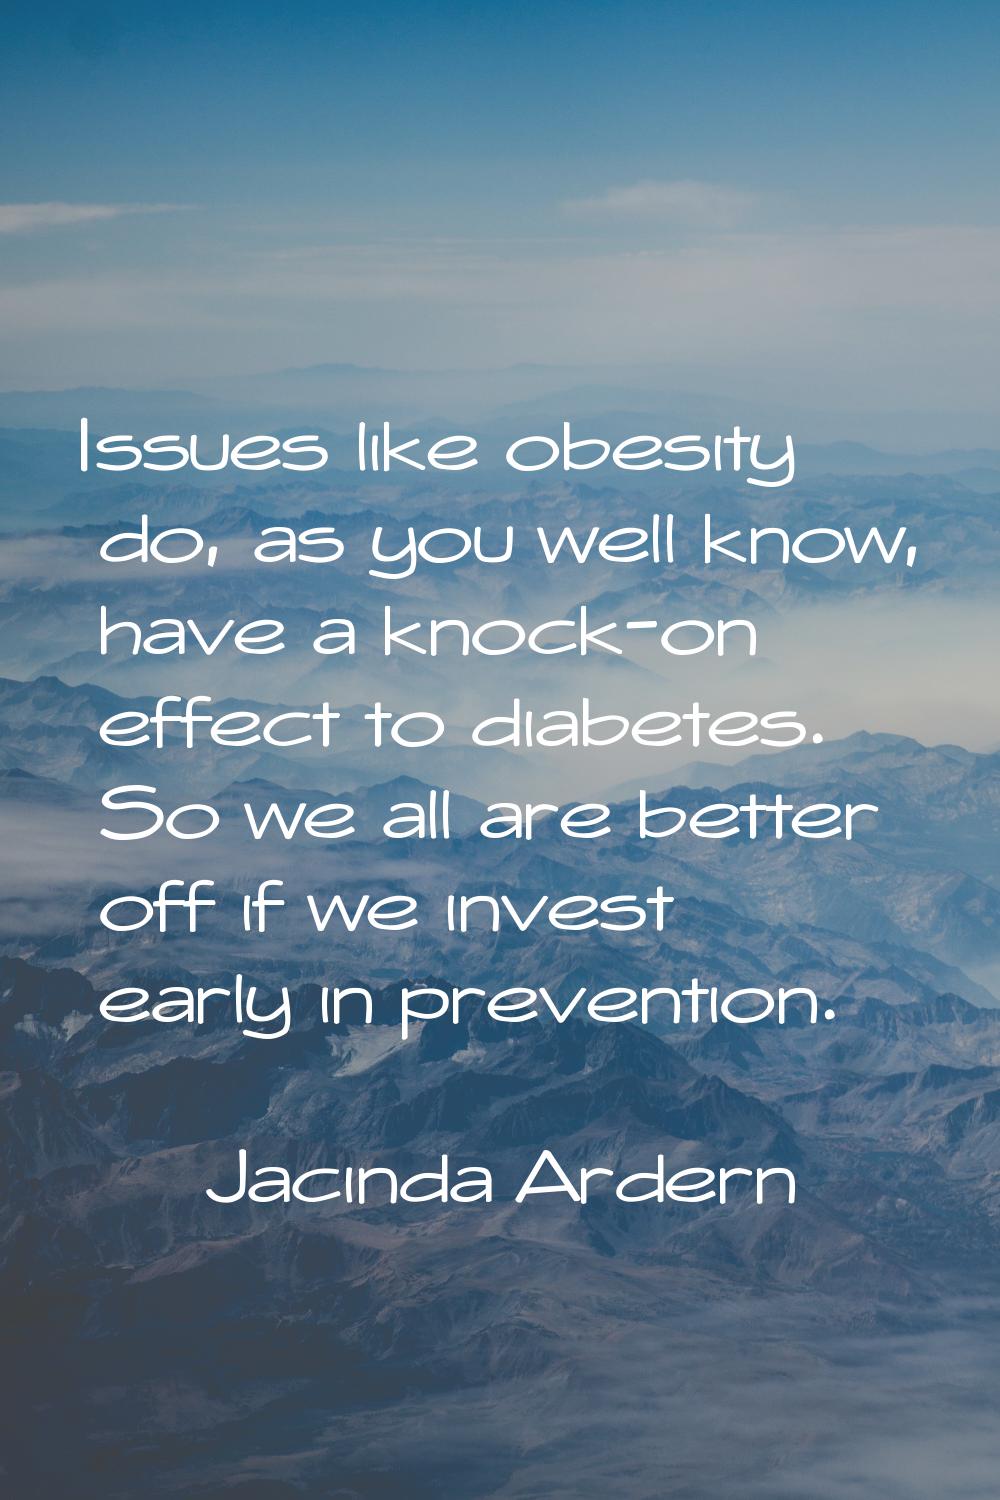 Issues like obesity do, as you well know, have a knock-on effect to diabetes. So we all are better 